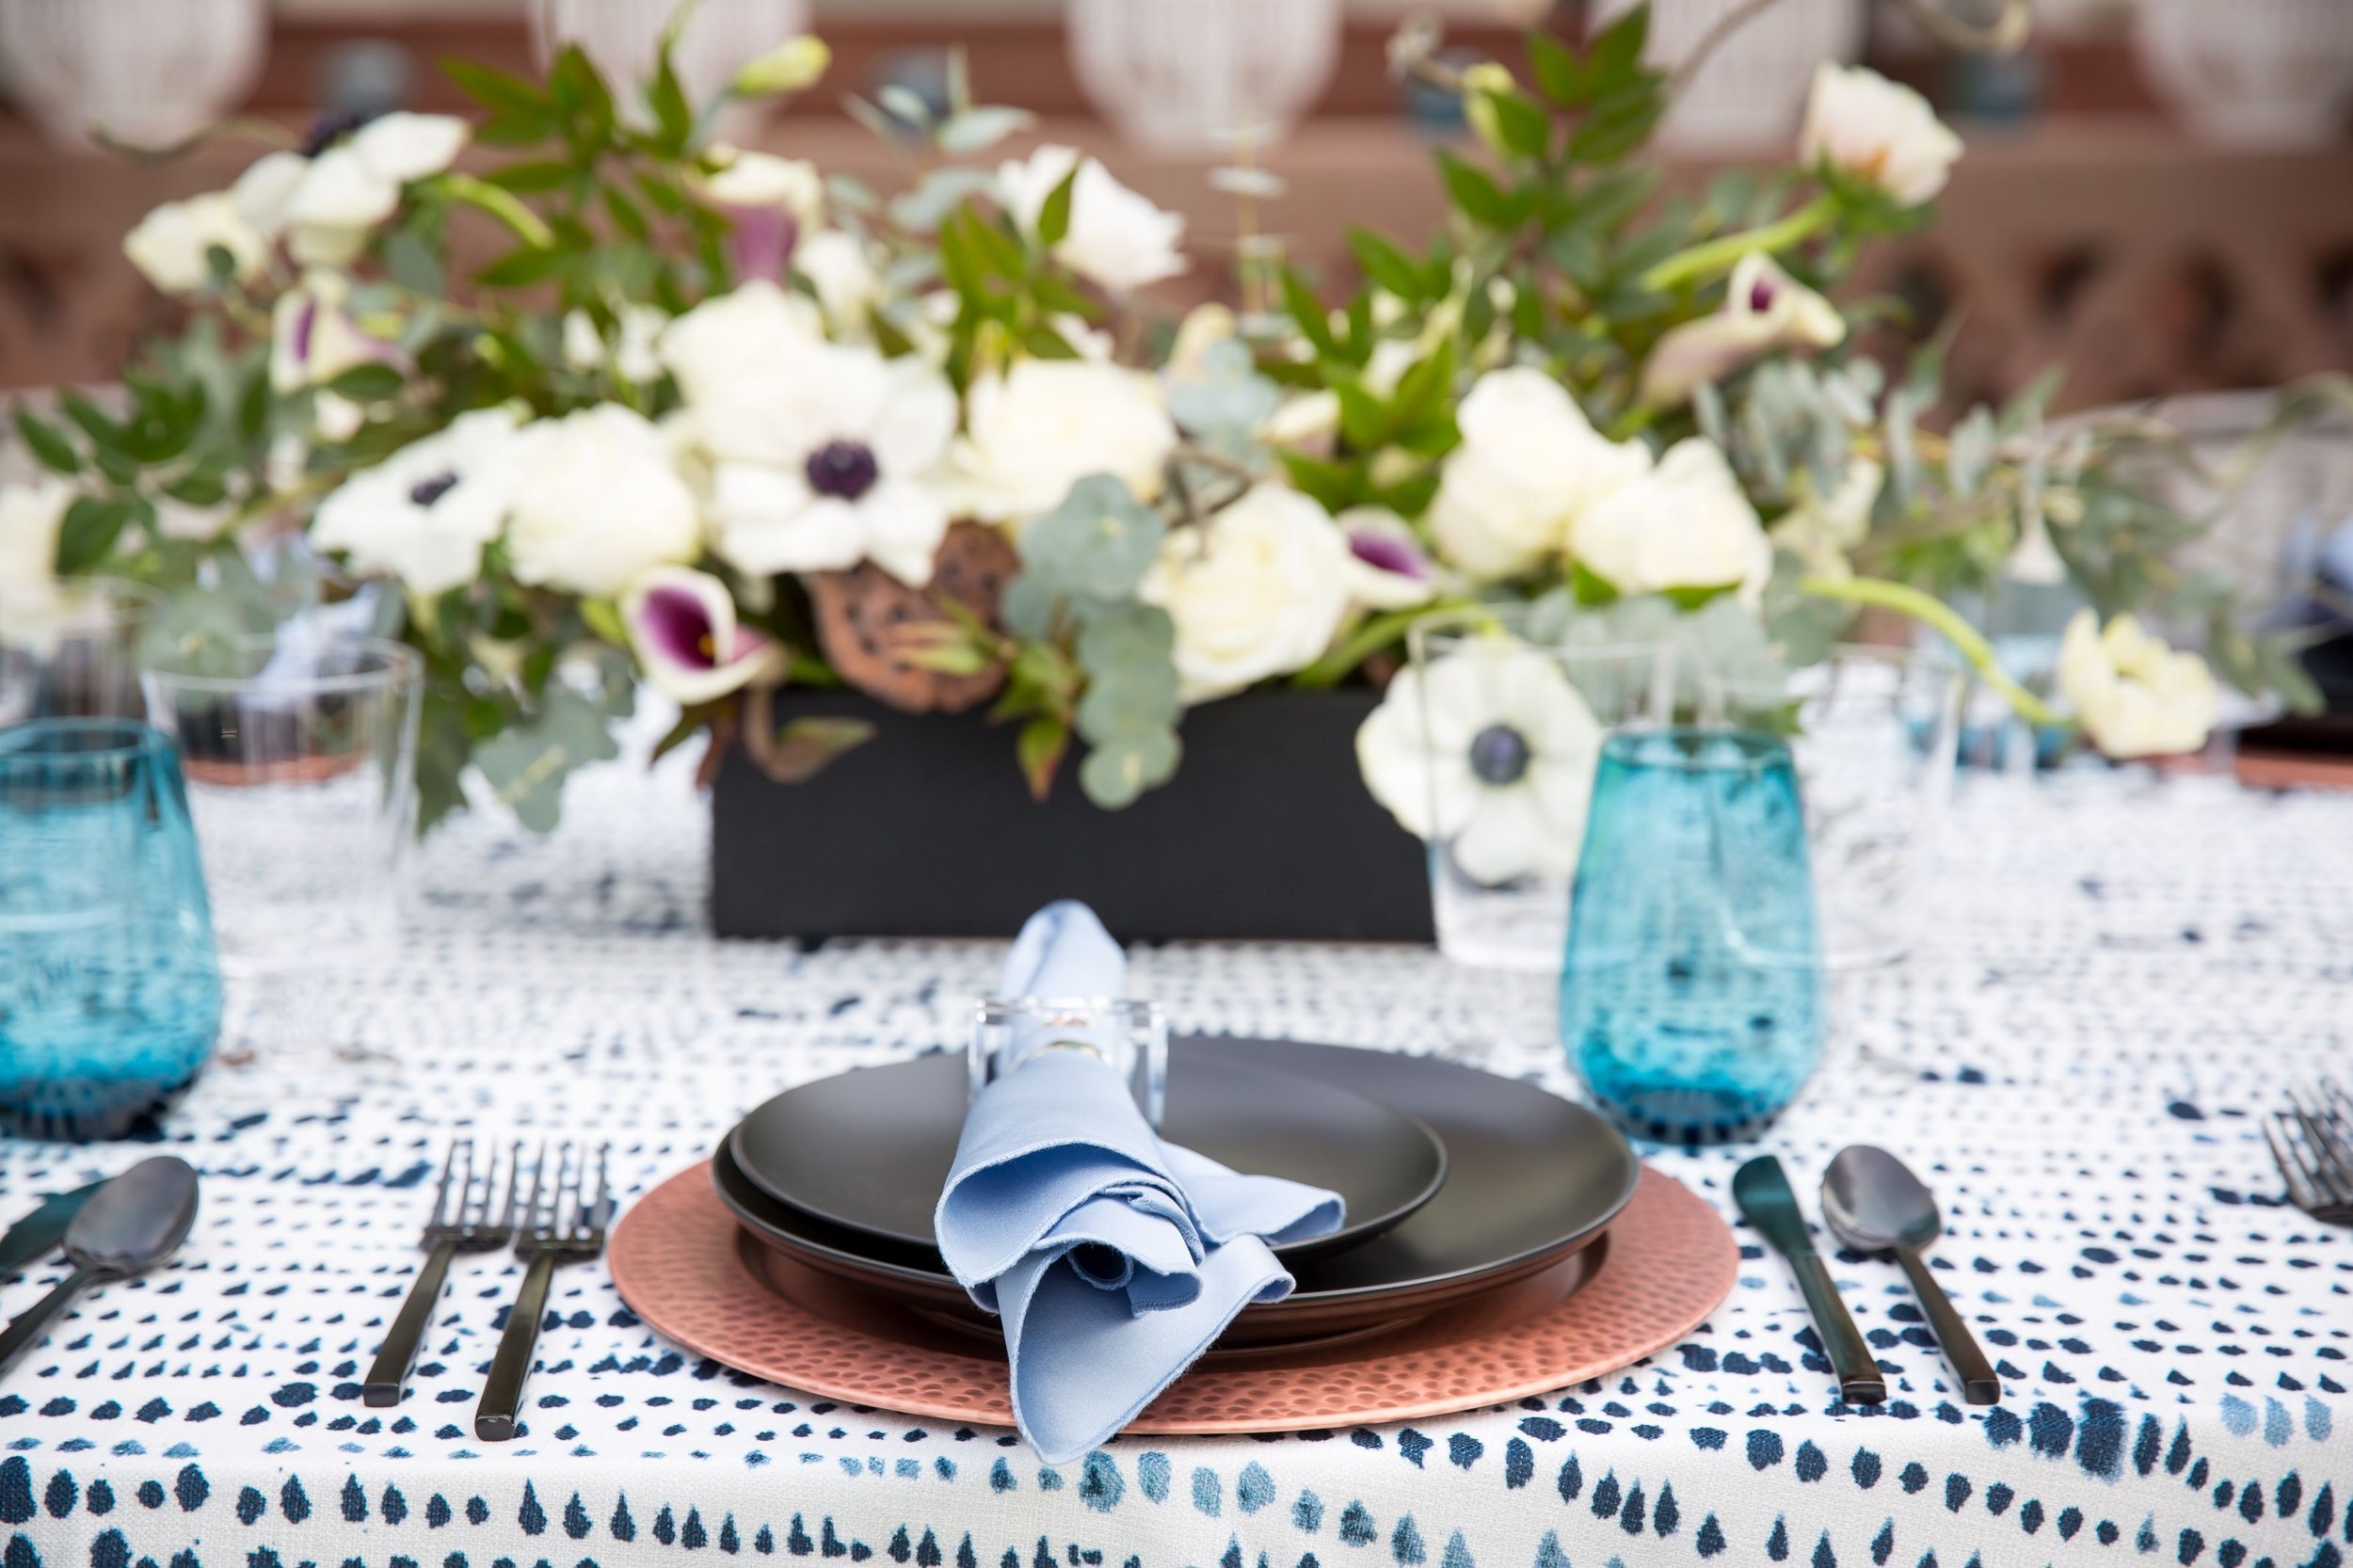 www.santabarbarawedding.com | Bright Event Rentals | Vanity Portrait Studio | Place Setting with Black Plates on a Brown Charger, Blue Glasses and Napkins All on a Blue and White Tablecloth